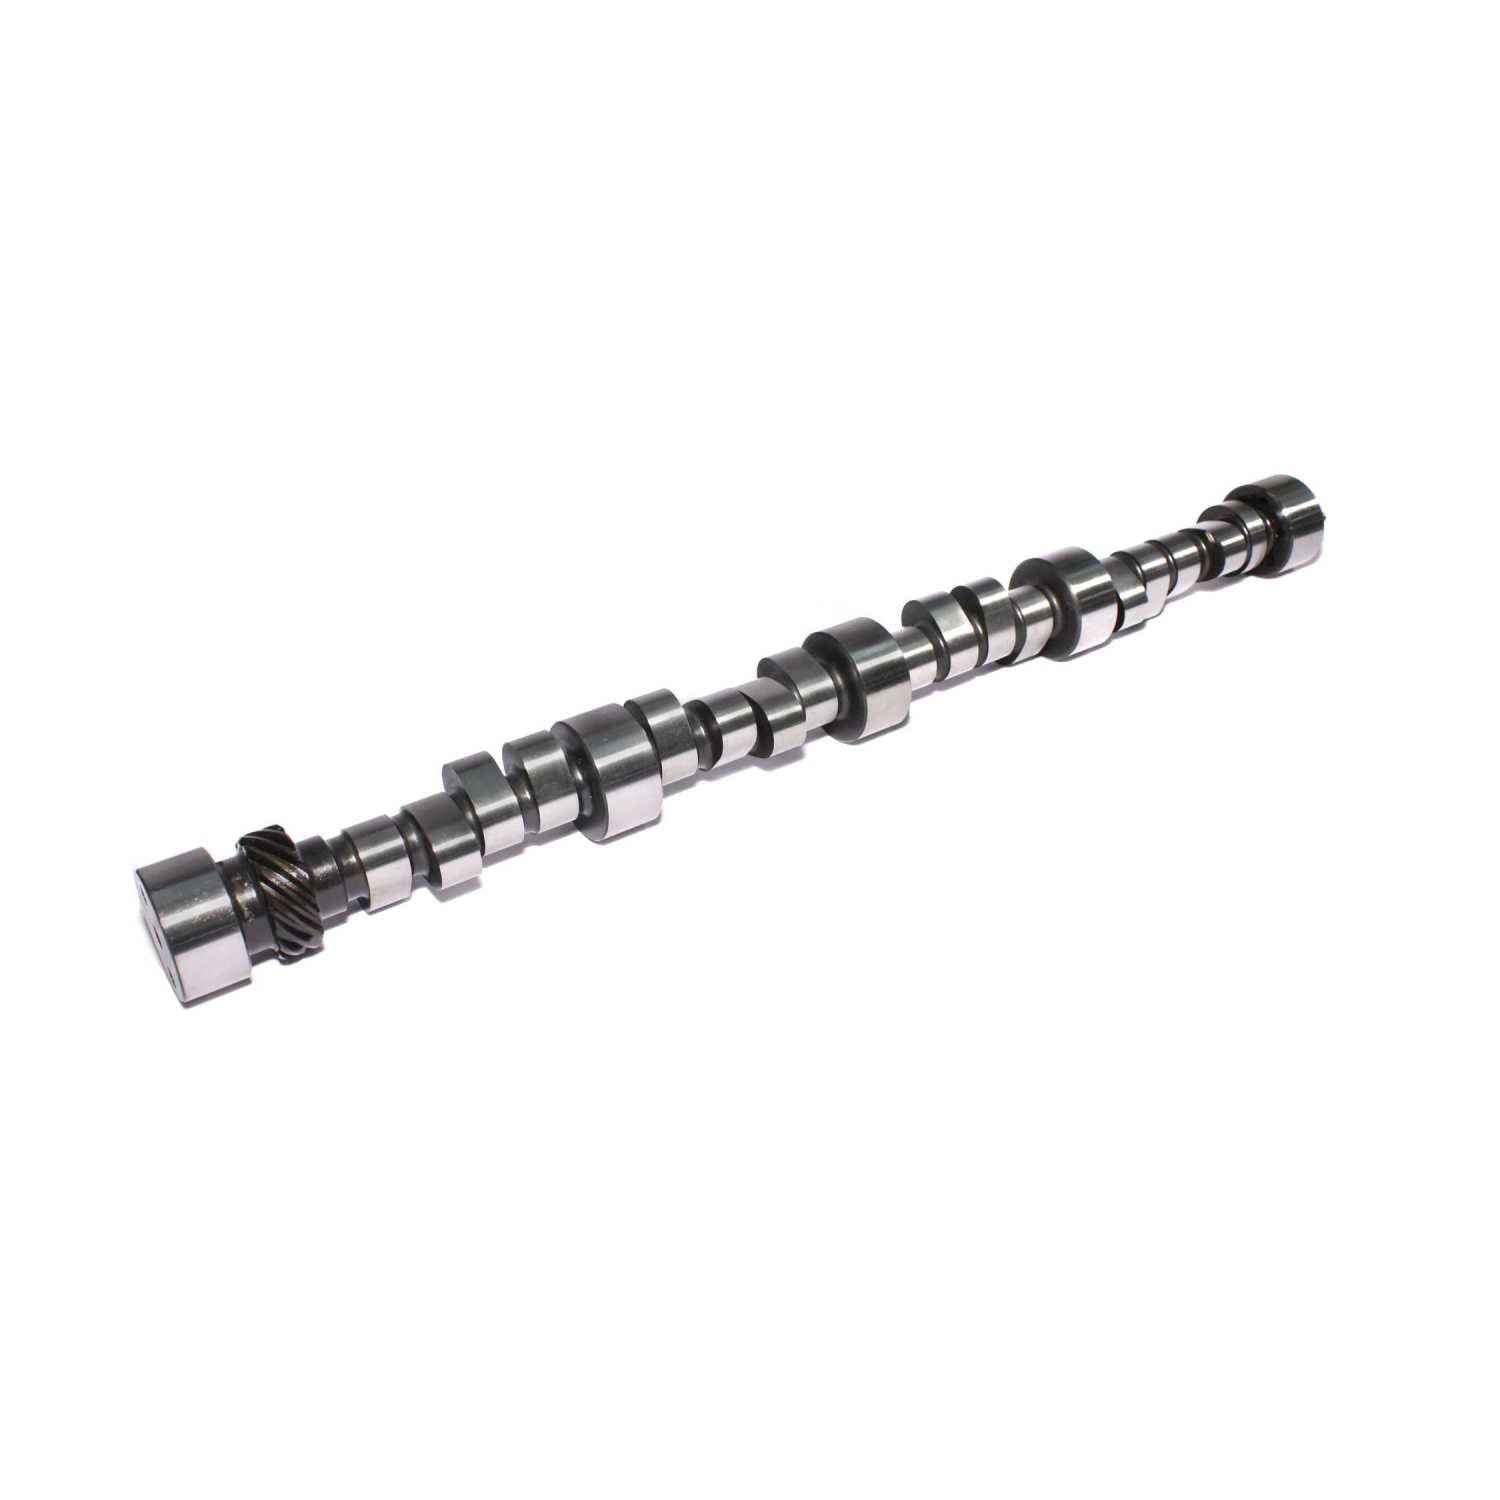 Competition Cams 11-736-9 Drag Race Camshaft